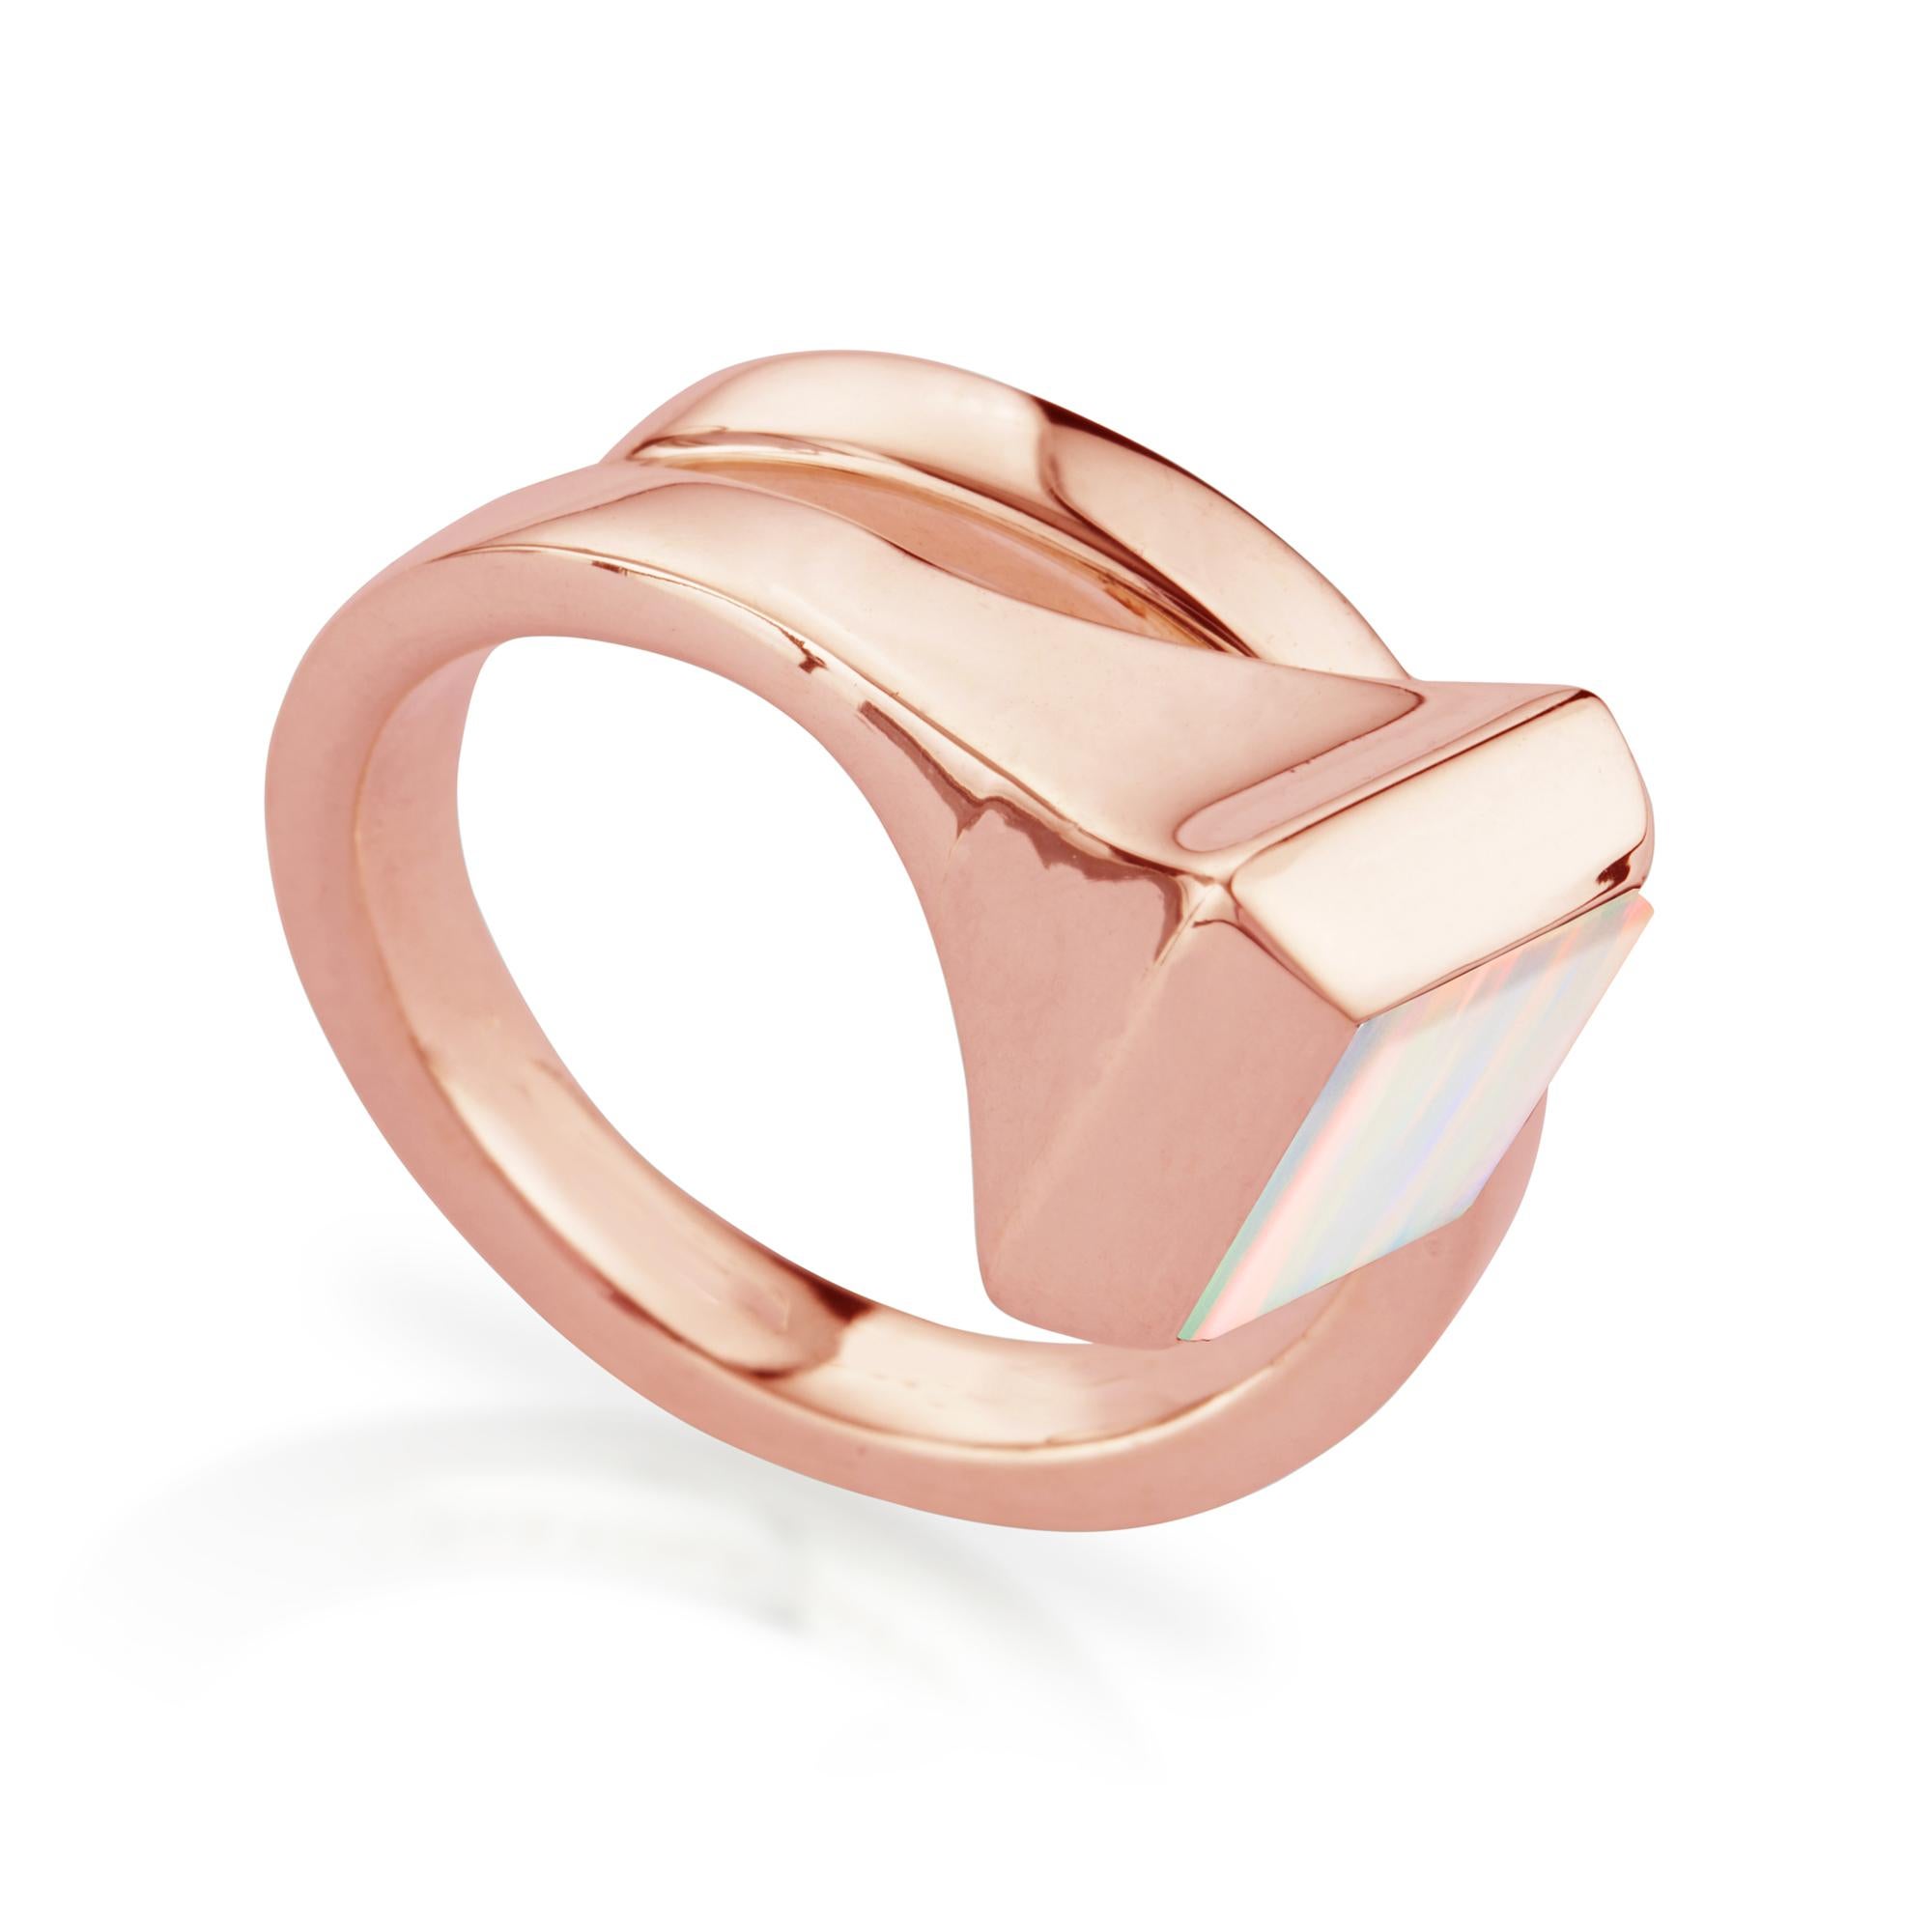 Modern ring in rose gold, set with opal, a gemstone which stimulates creativity and strengthens memory. Shaped to twist organically around the finger. Rebellious and sophisticated with a rock vibe. The design is inspired by the equestrian world,